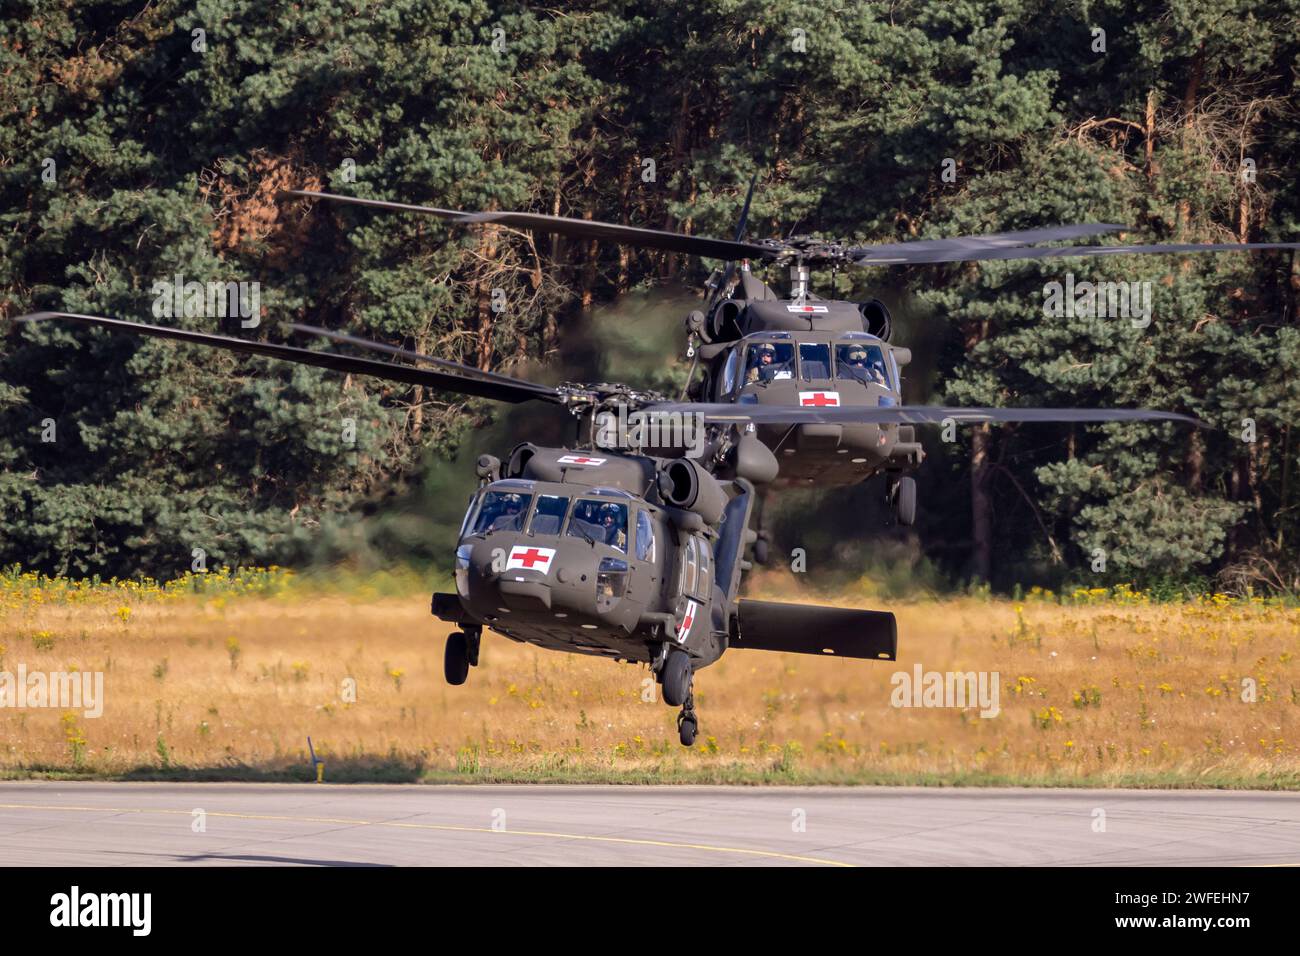 US Army Sikorsky HH-60M Blackhawk medevac helicopters taking off. USA - June 22, 2018 Stock Photo